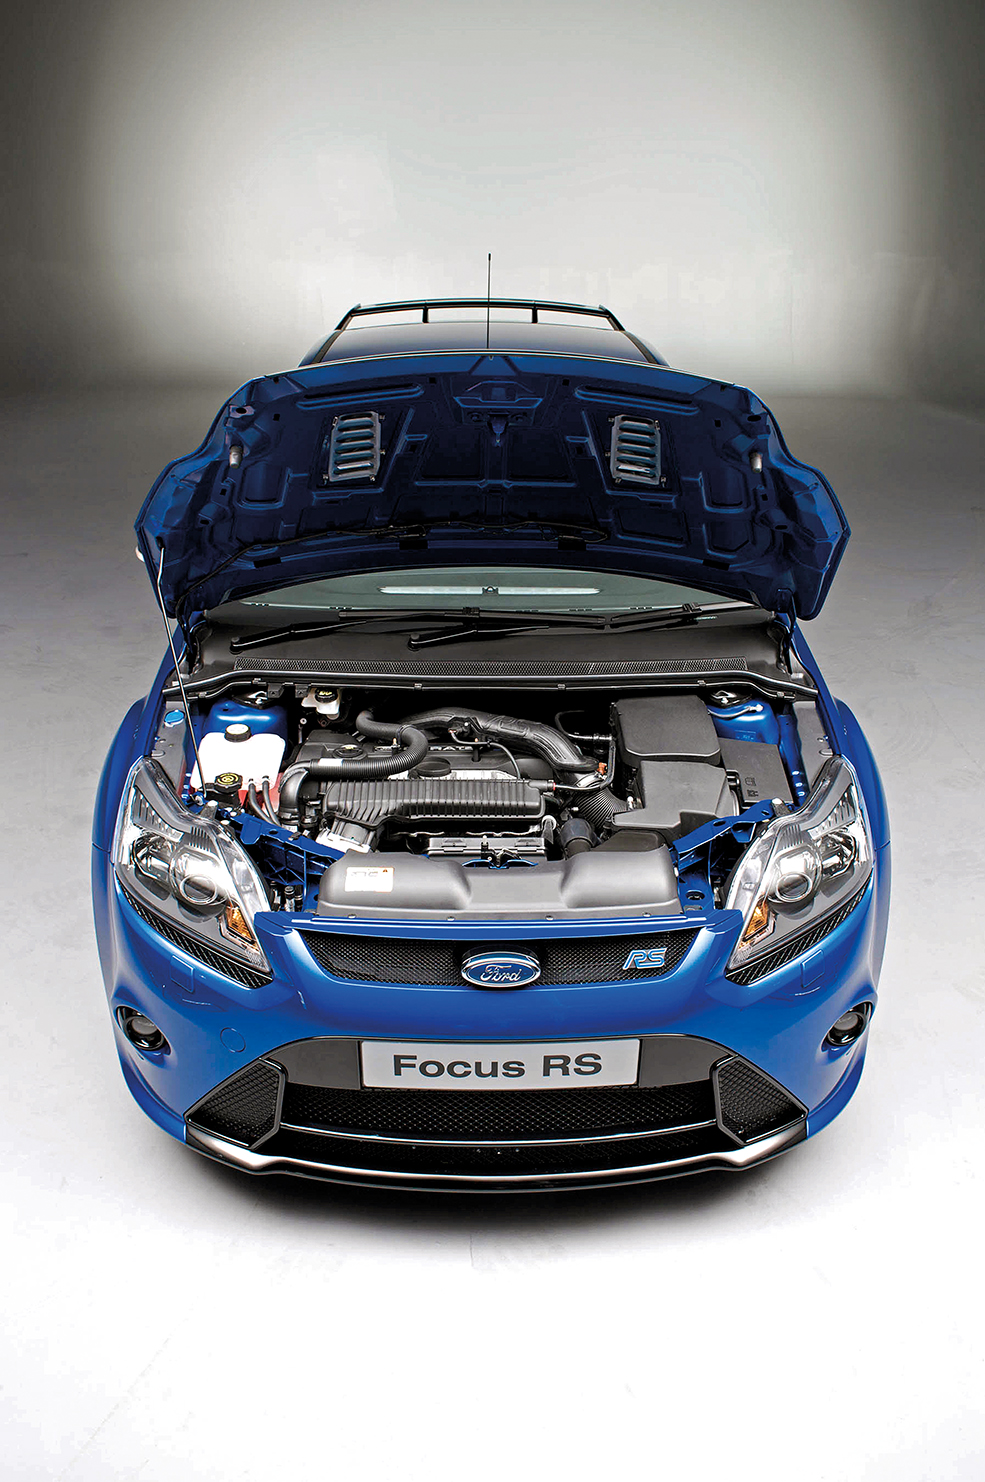 Ford Focus RS Mk2 with bonnet open